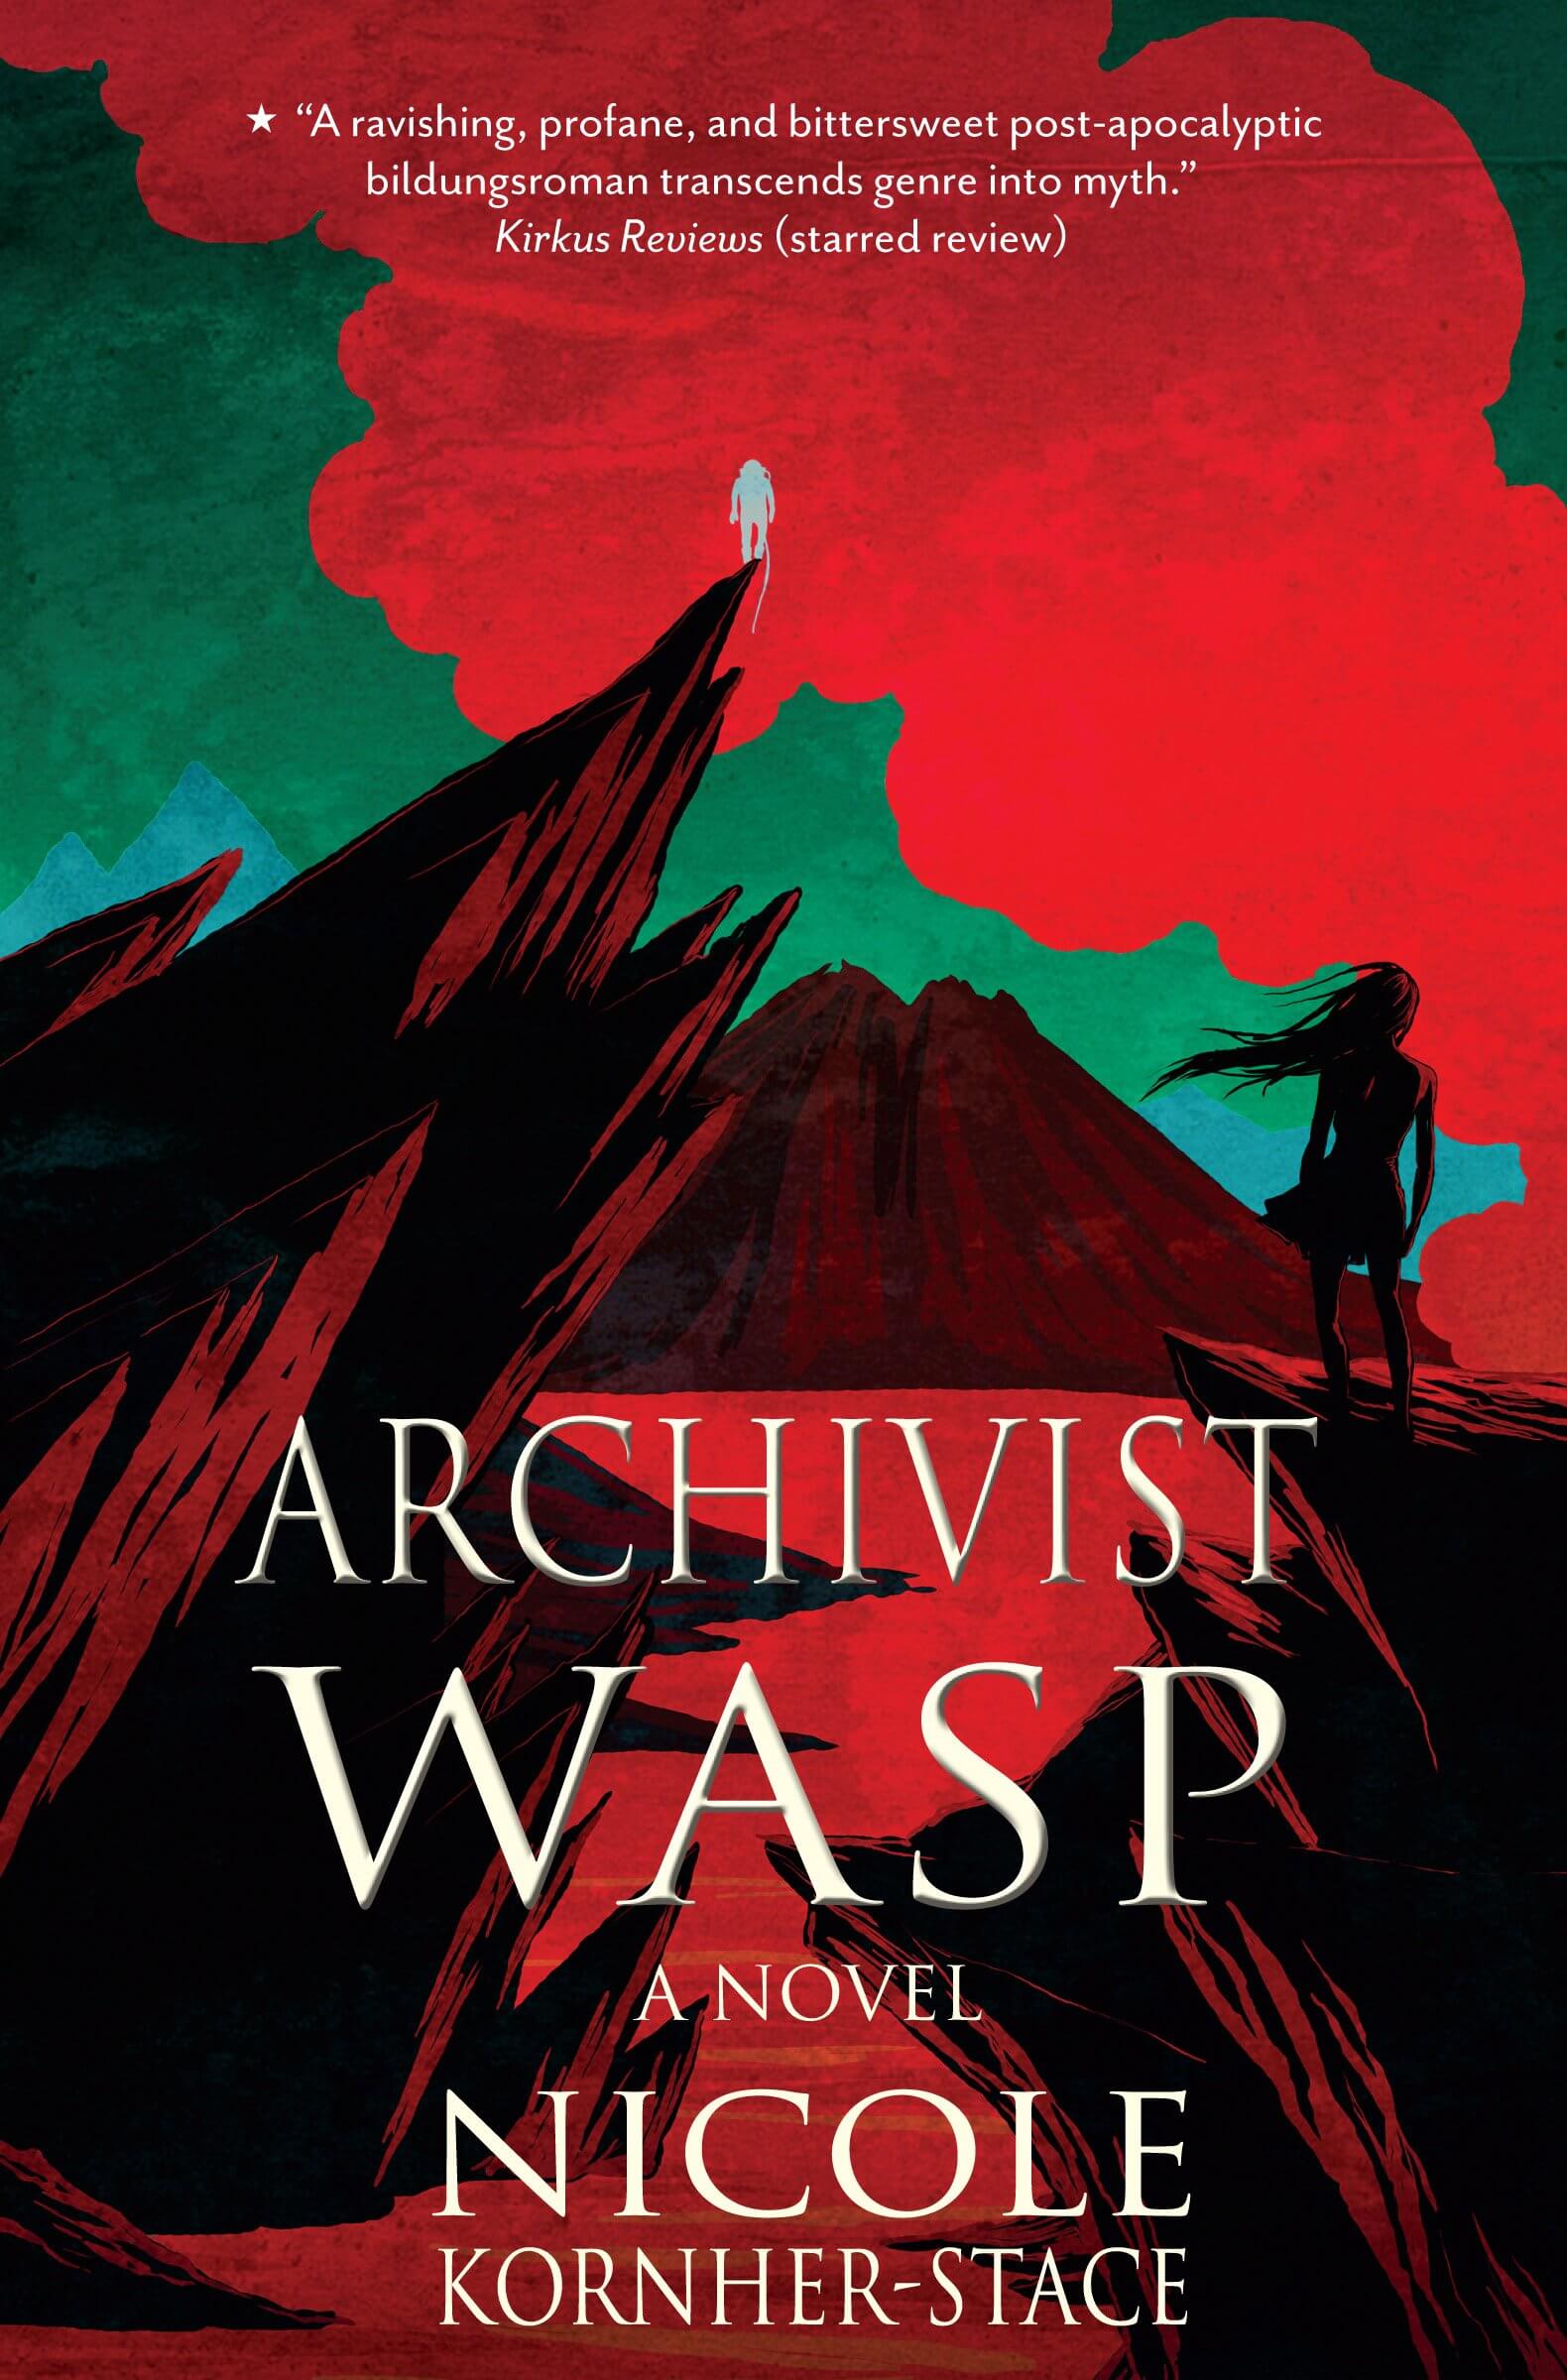 Nicole Kornher-Stace: Archivist Wasp (Paperback, 2015, Small Beer Press)